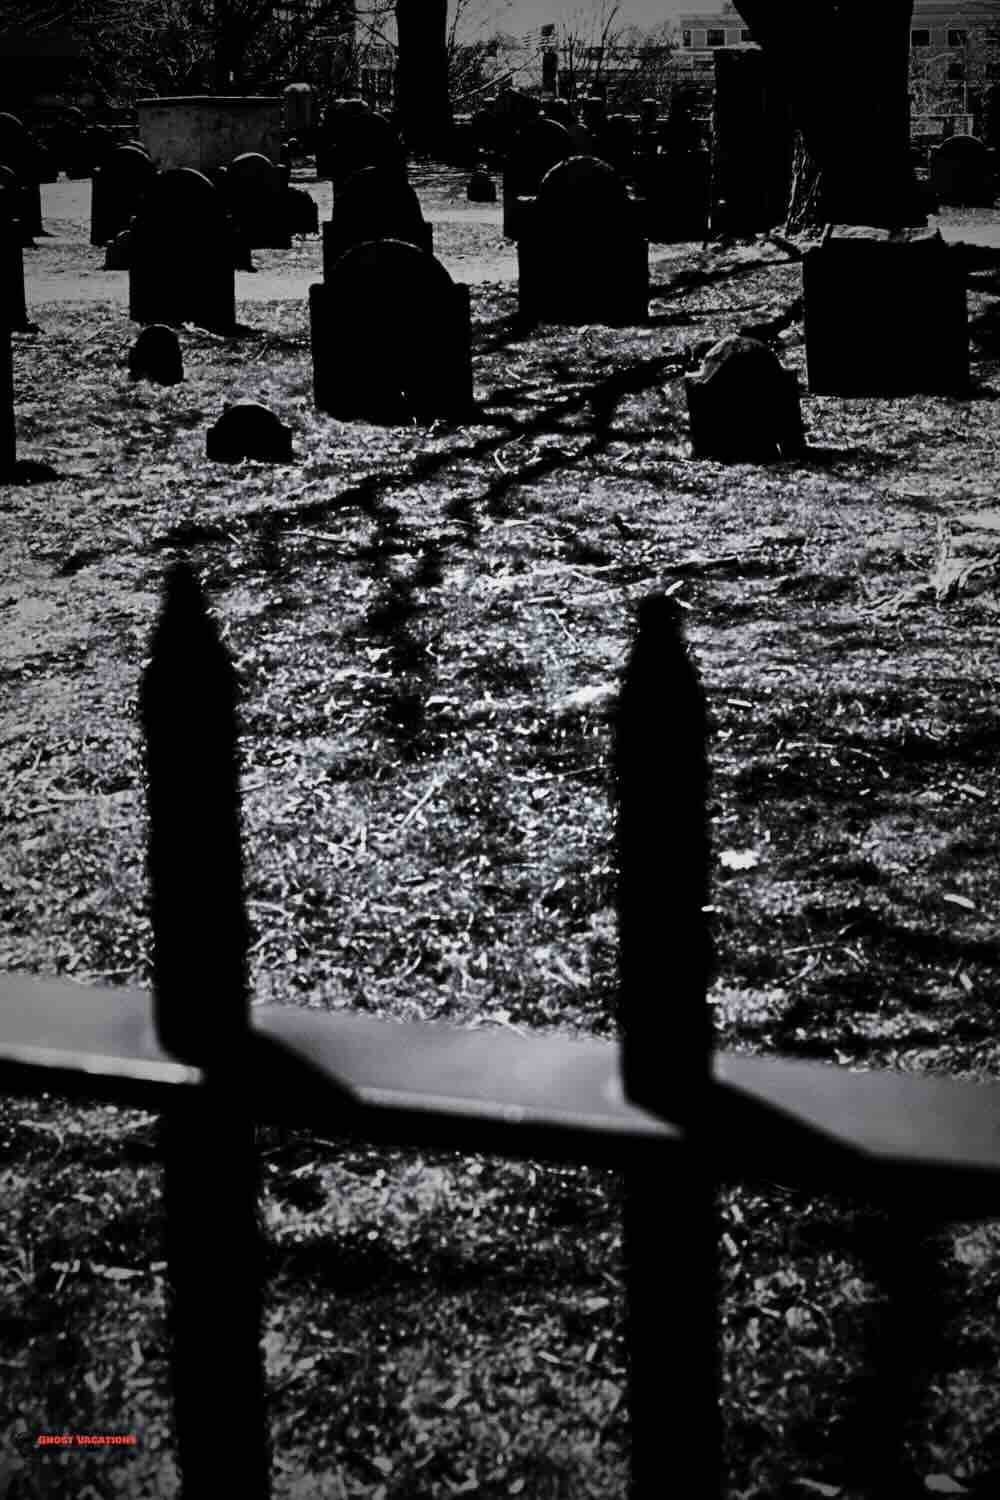 "Eerie twilight at Charles Street Cemetery, a key stop on Salem ghost tours."